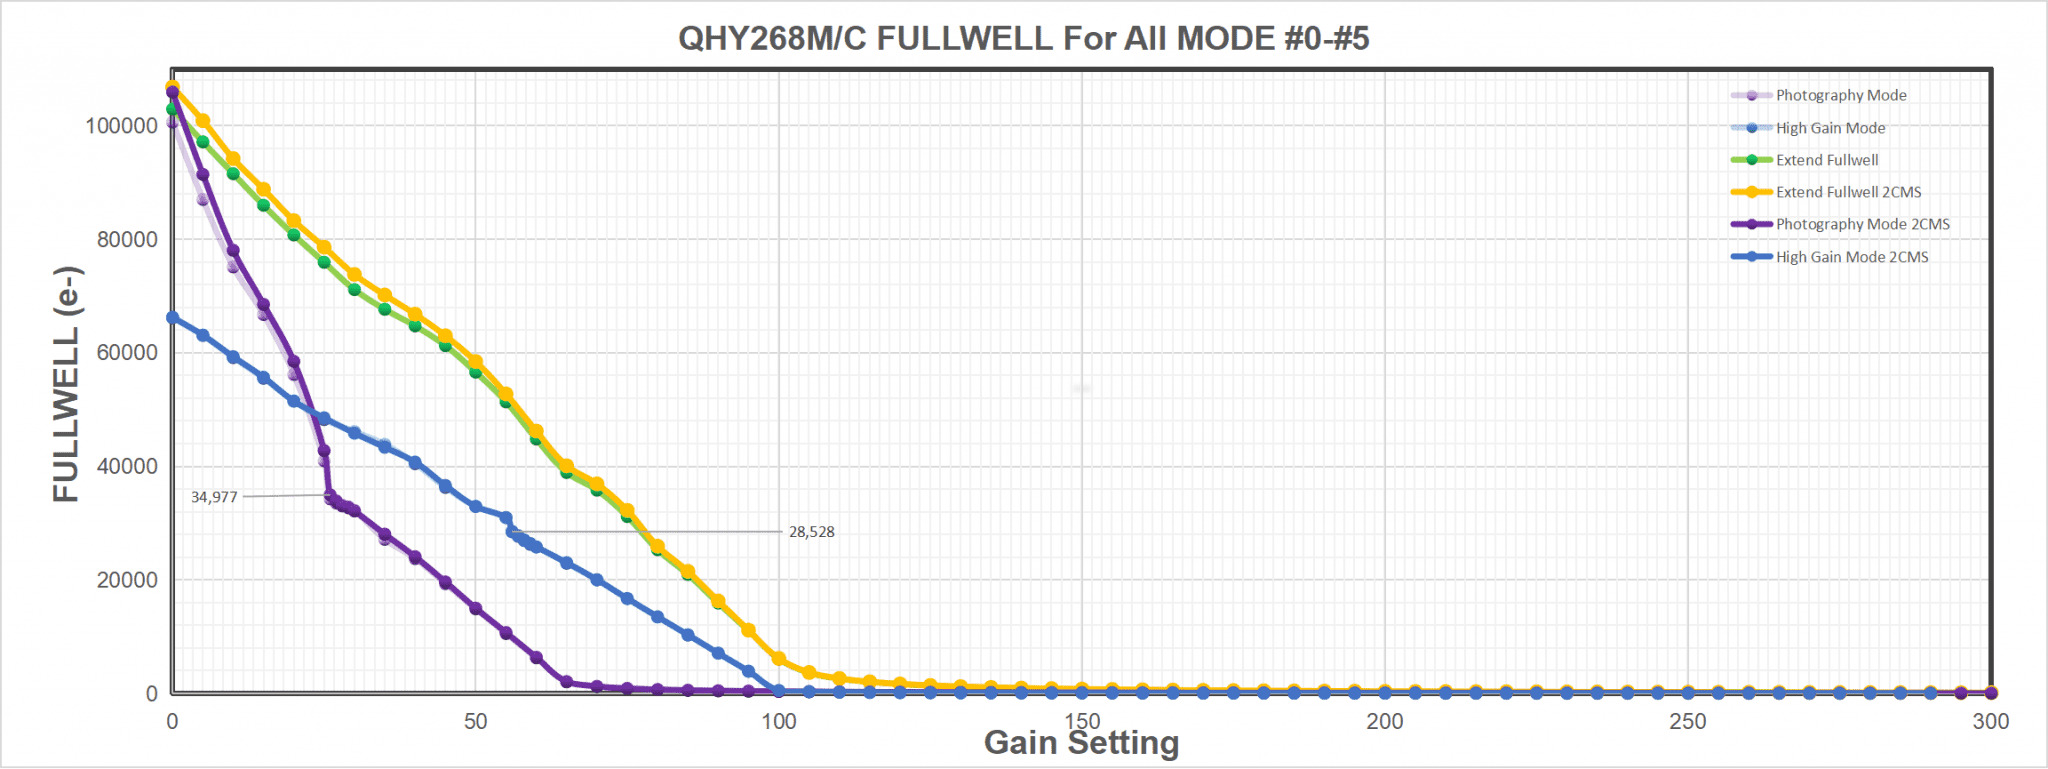 QHY268M/C Fullwell For All Mode